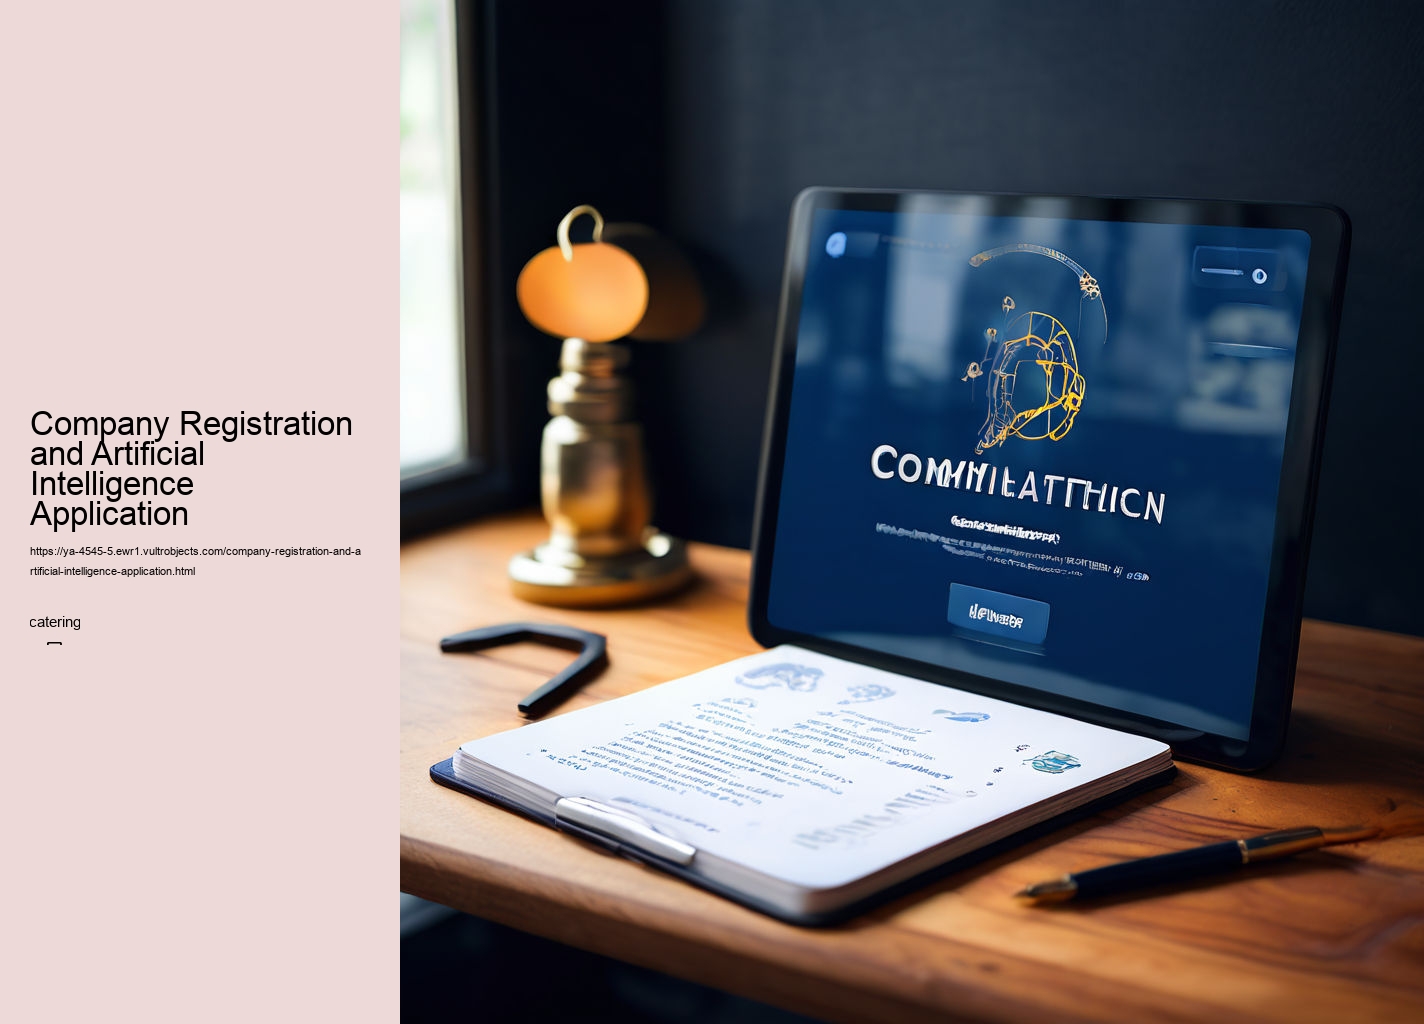 Company Registration and Artificial Intelligence Application